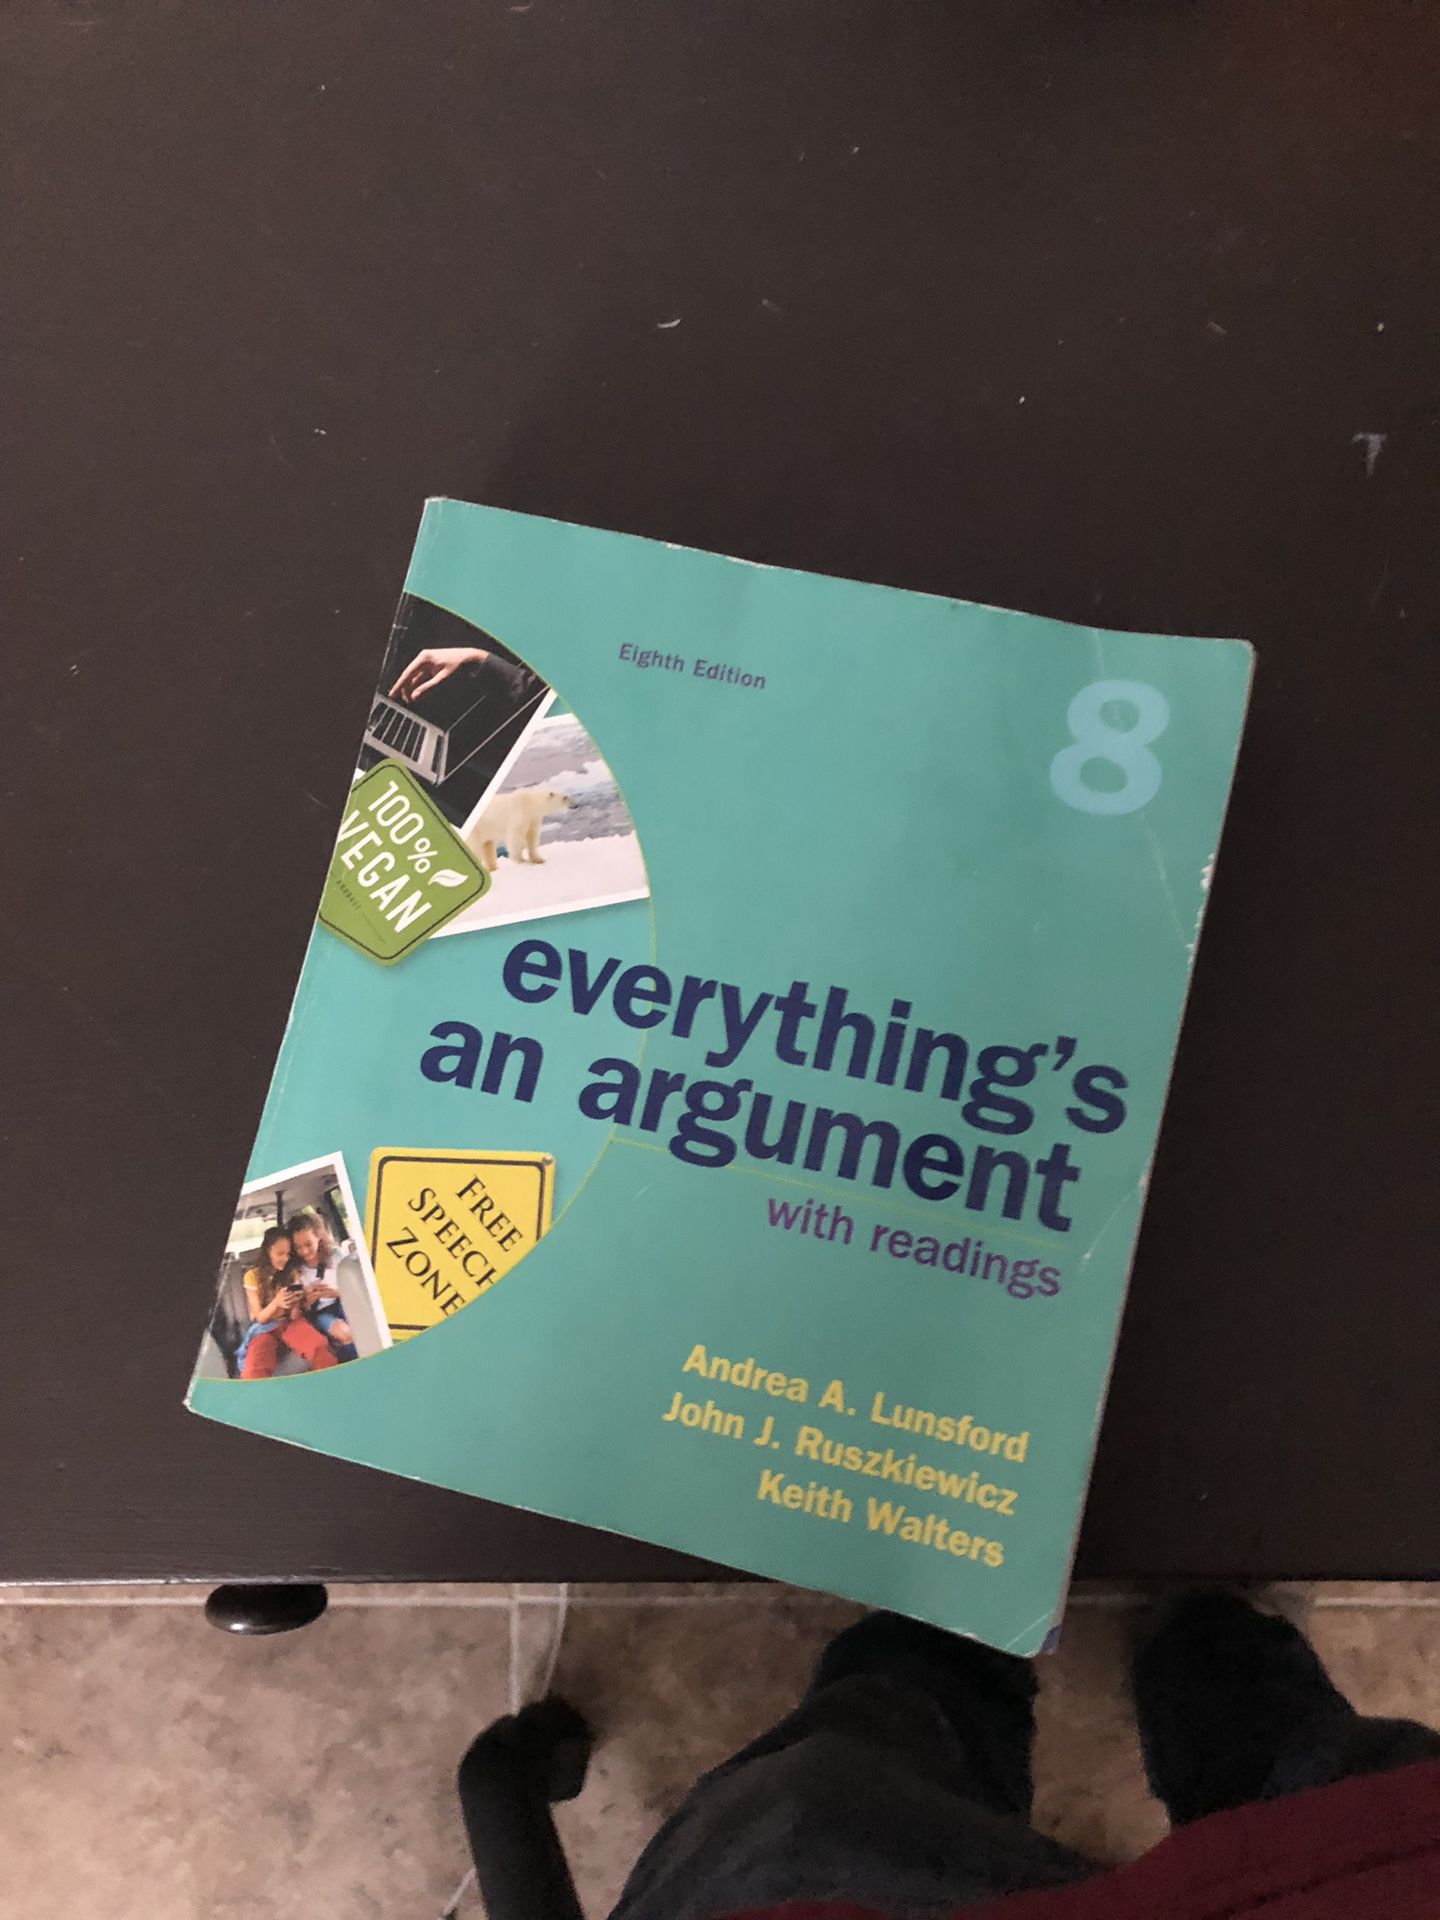 English 101 Textbook: Everything’s an argument by Andrea A. Lunsford.